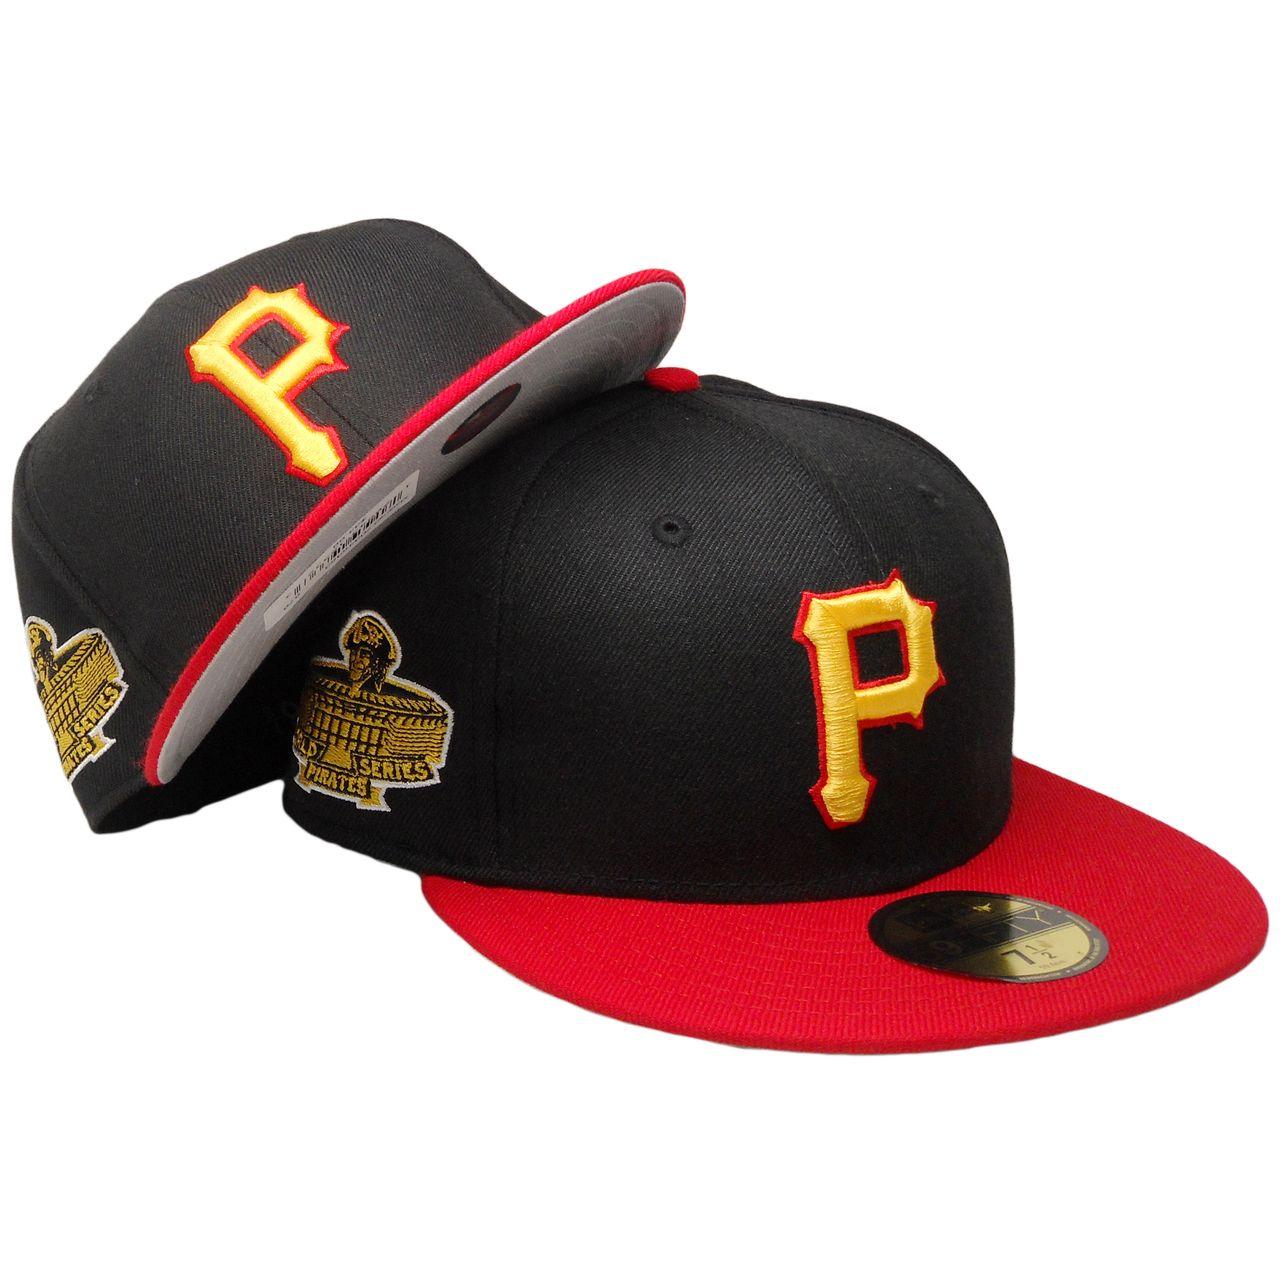 Black N Red and Yellow Logo - Pittsburg Pirates New Era 59Fifty Custom Fitted Hat, Red